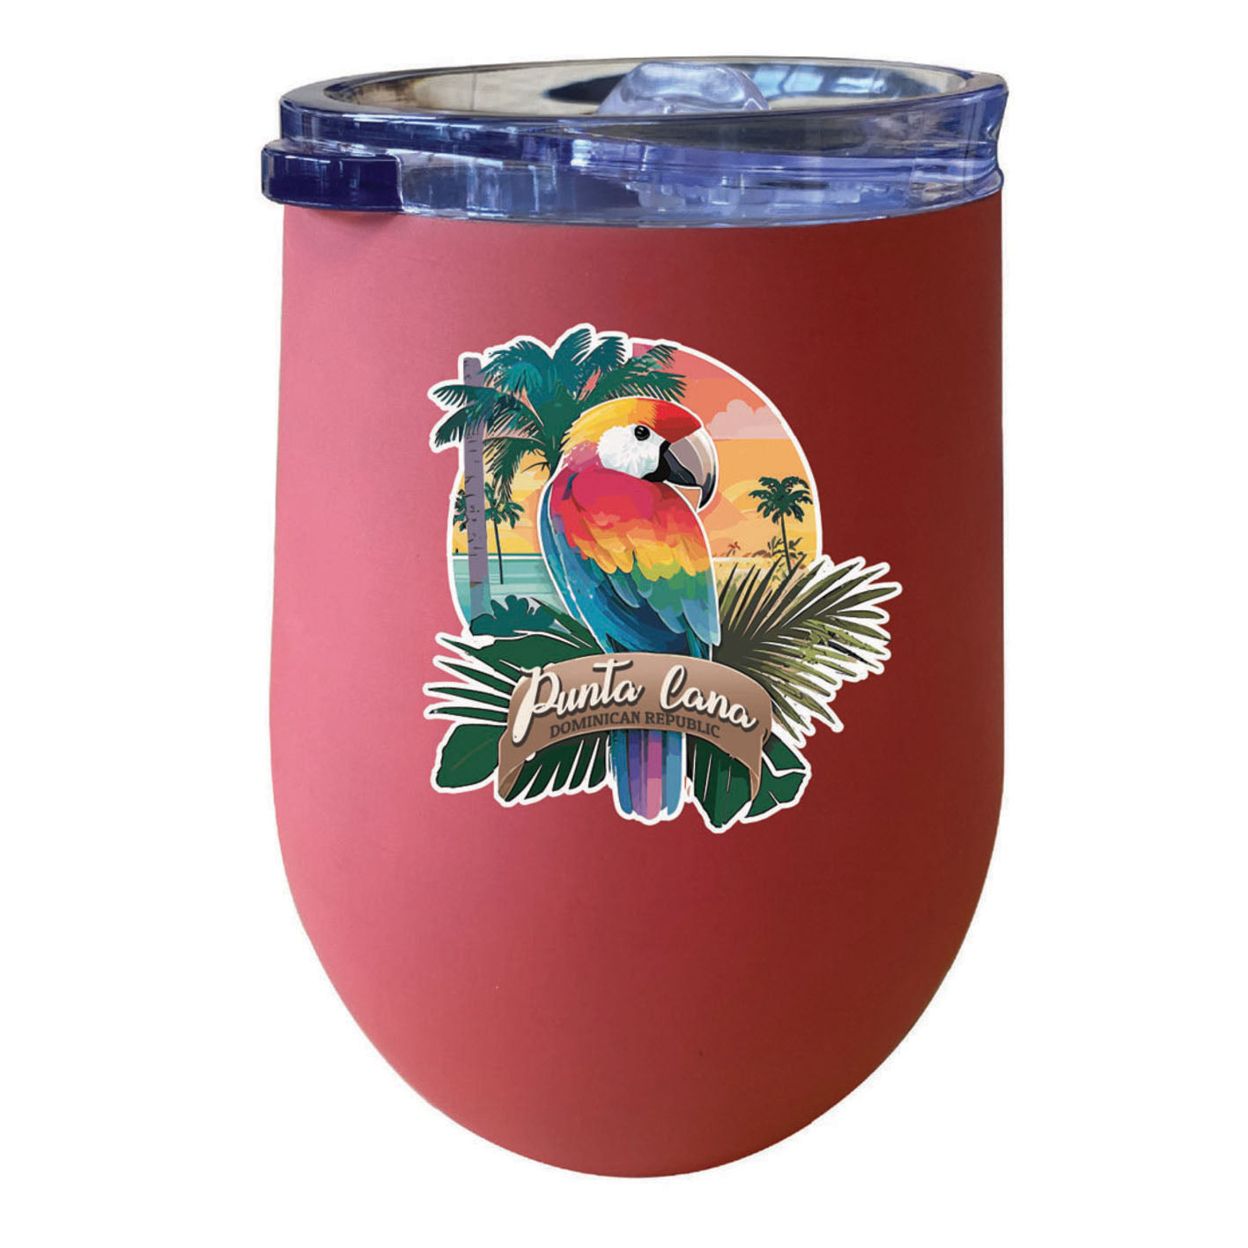 Punta Cana Dominican Republic Souvenir 12 Oz Insulated Wine Stainless Steel Tumbler - Coral, PARROT